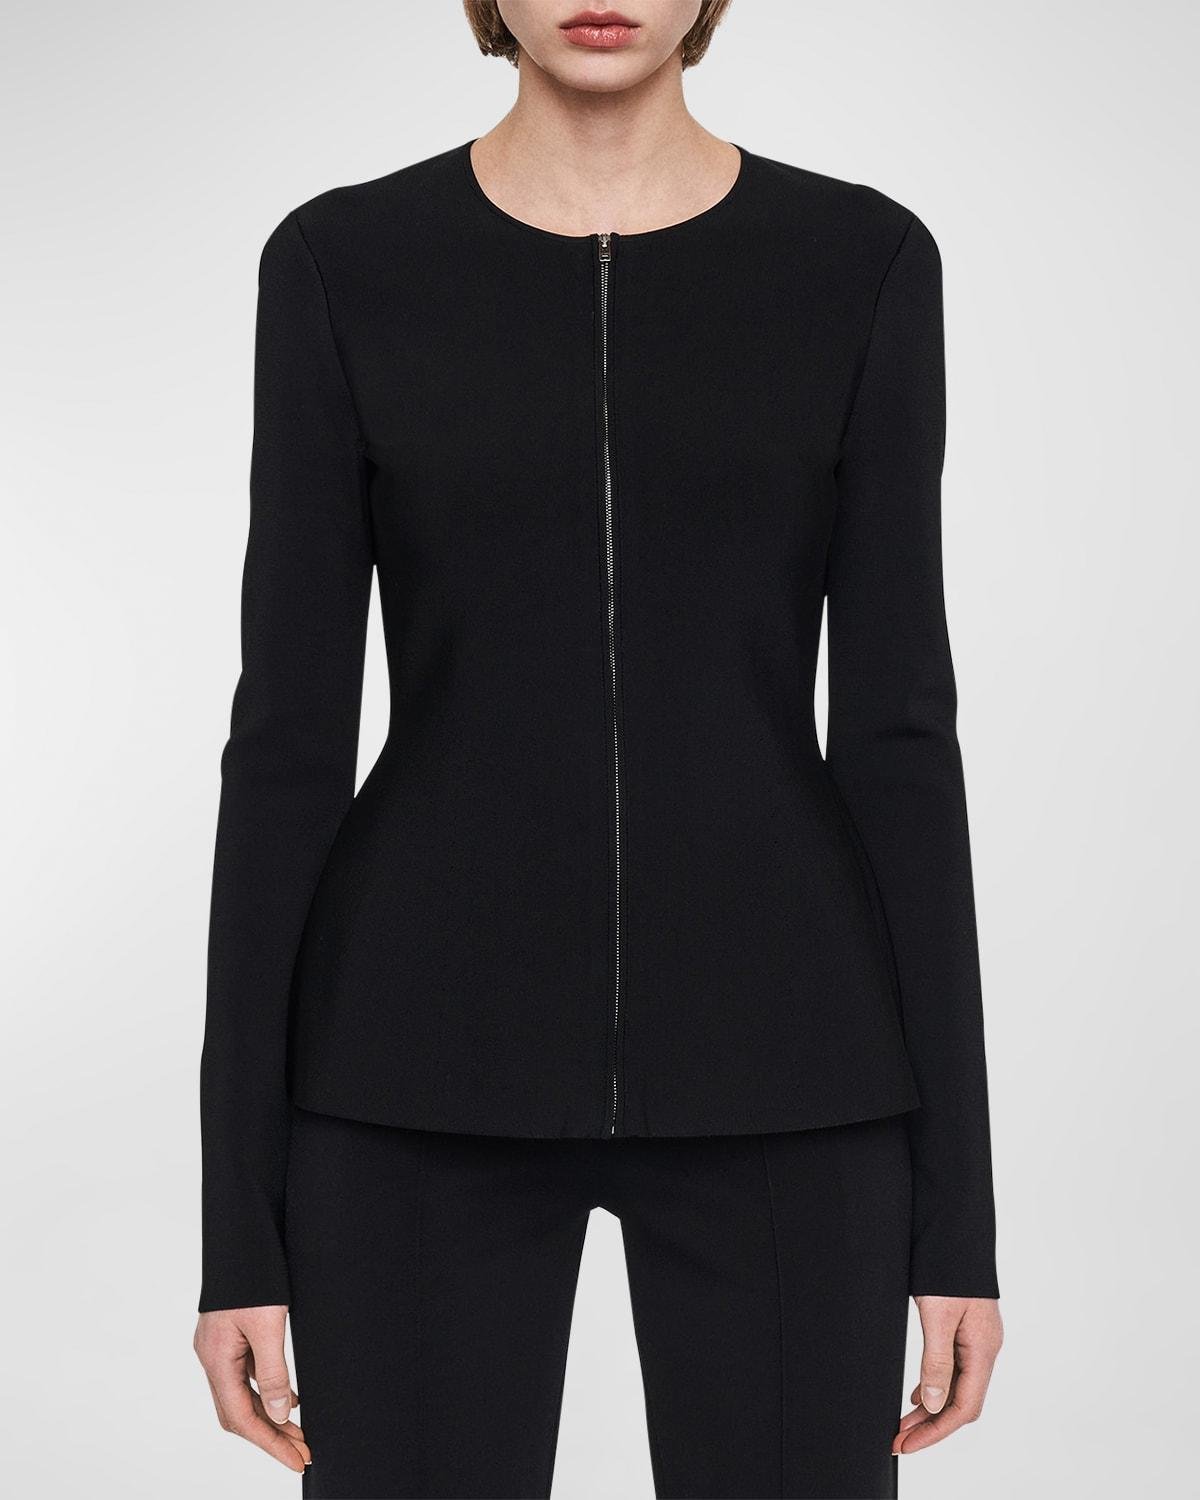 Zip-Front Milano Knit Top by JOSEPH